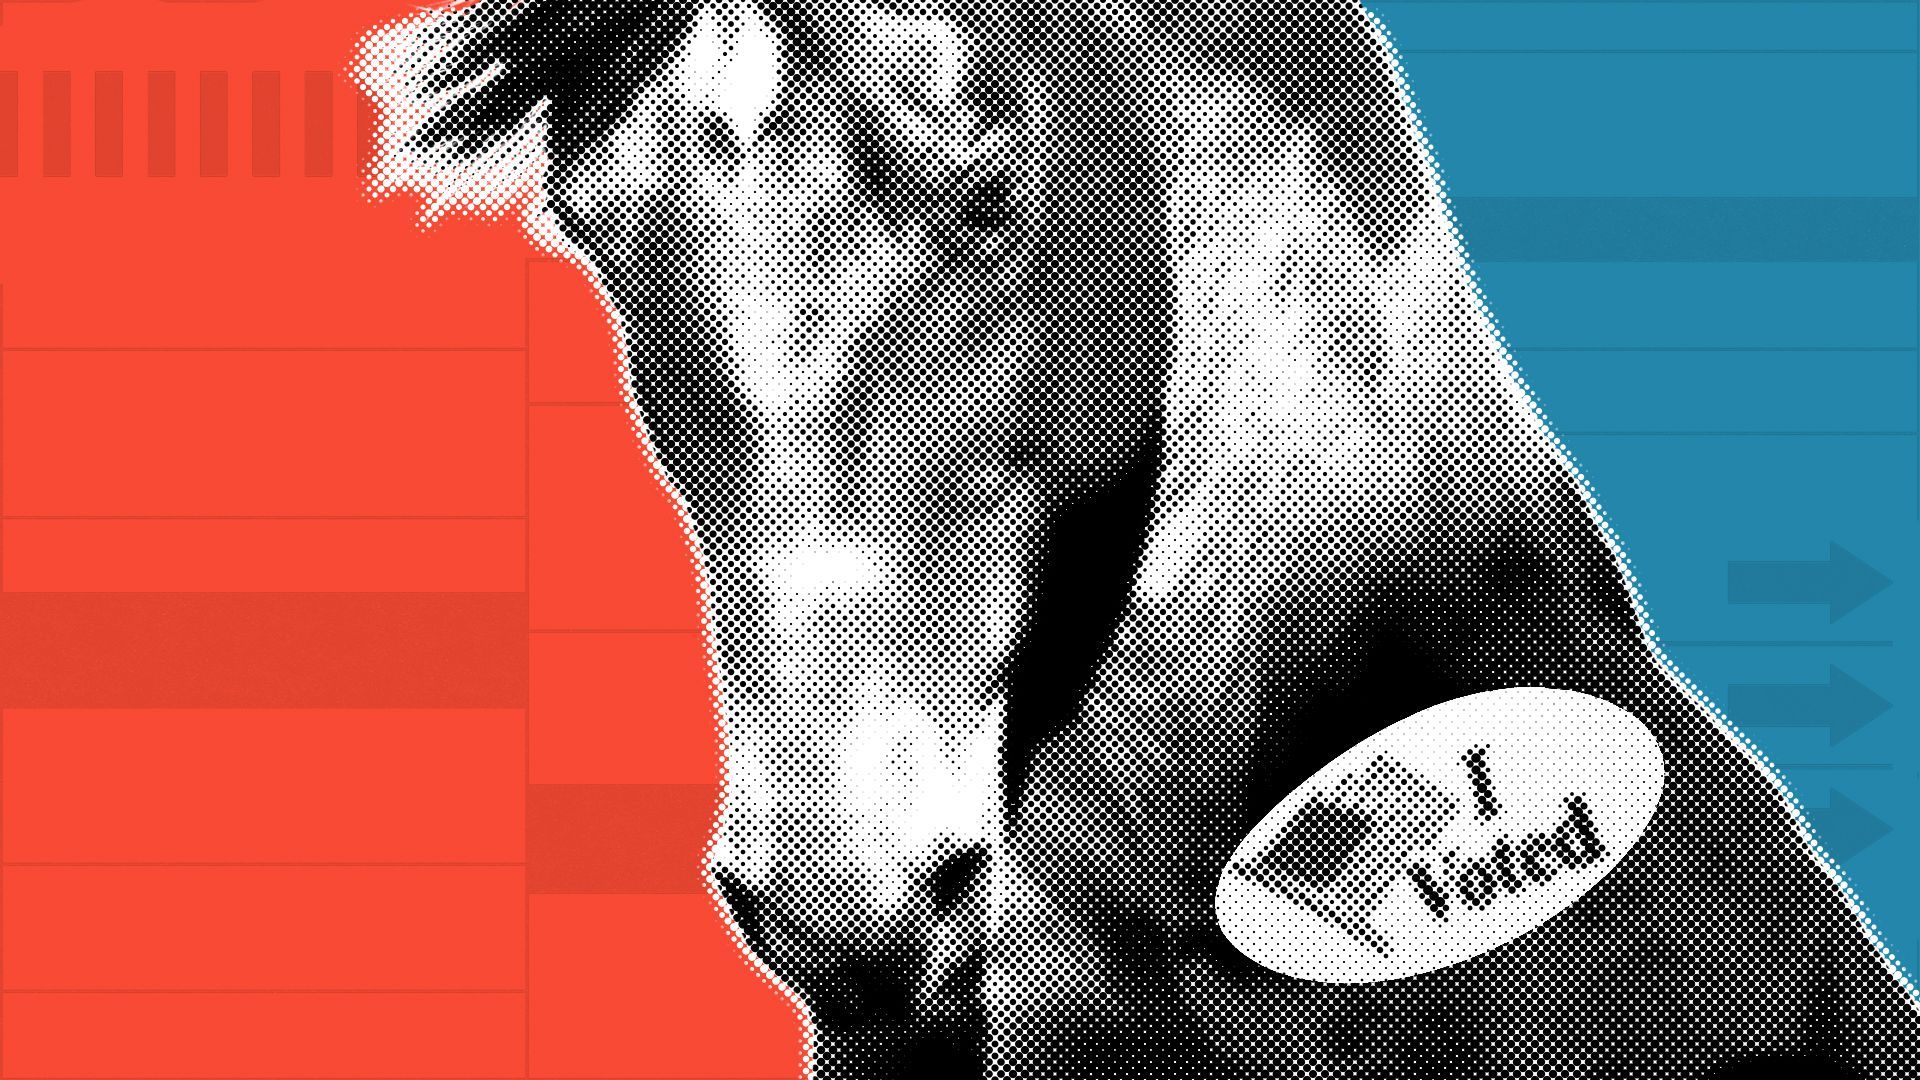 Illustration of a horse wearing an I voted sticker over a divided red and blue background with elements of ballots. 